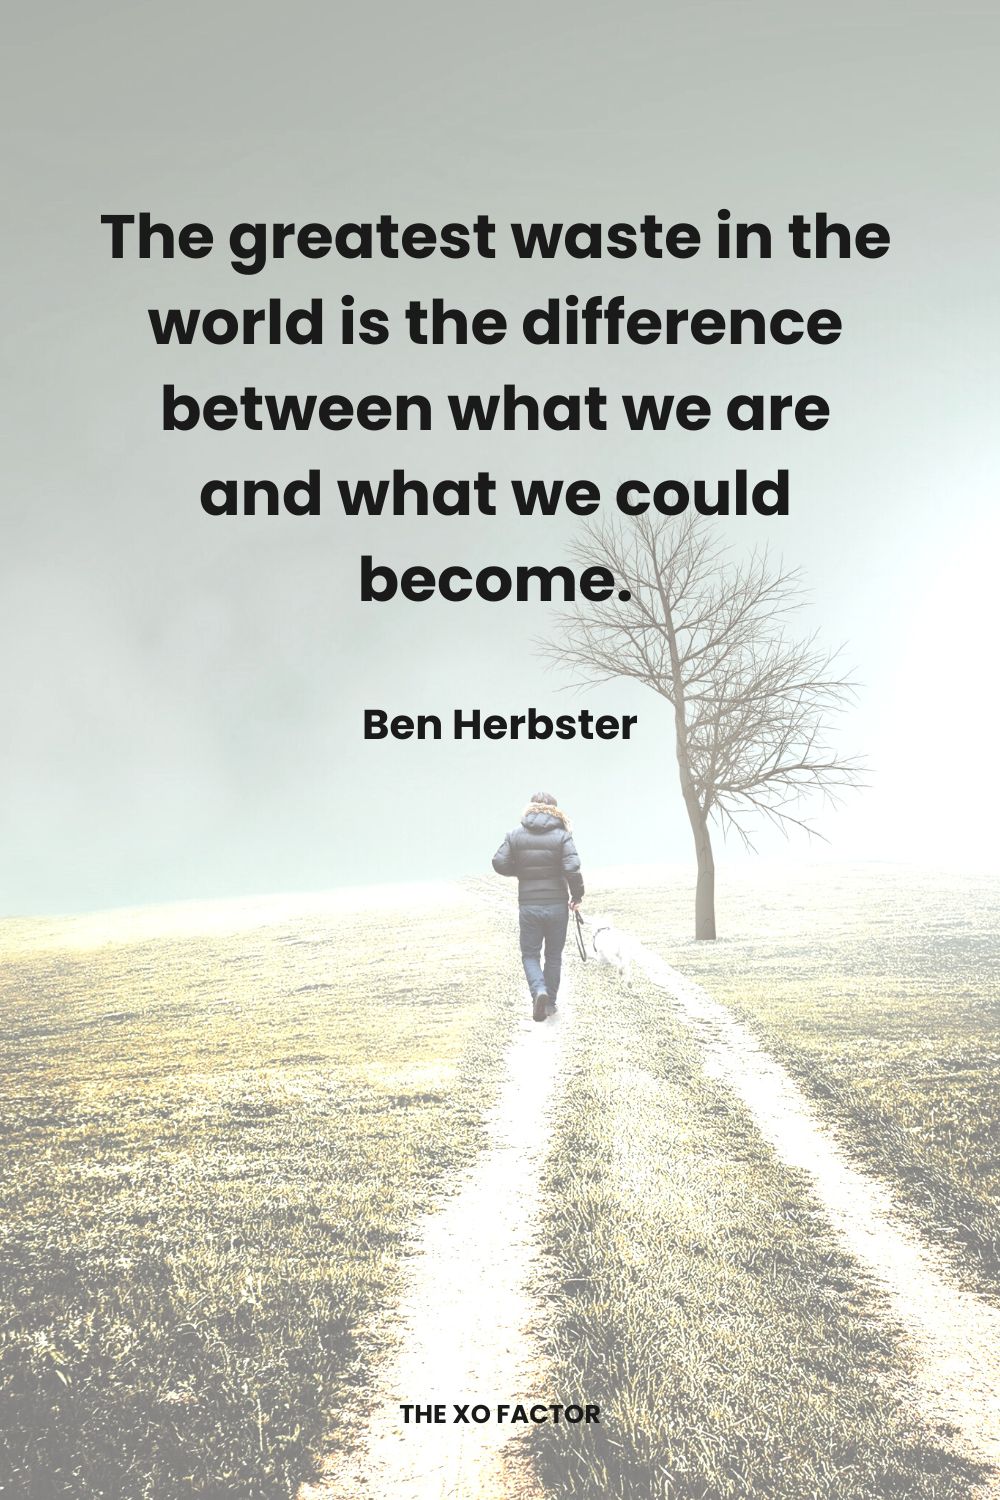 The greatest waste in the world is the difference between what we are and what we could become. Ben Herbster